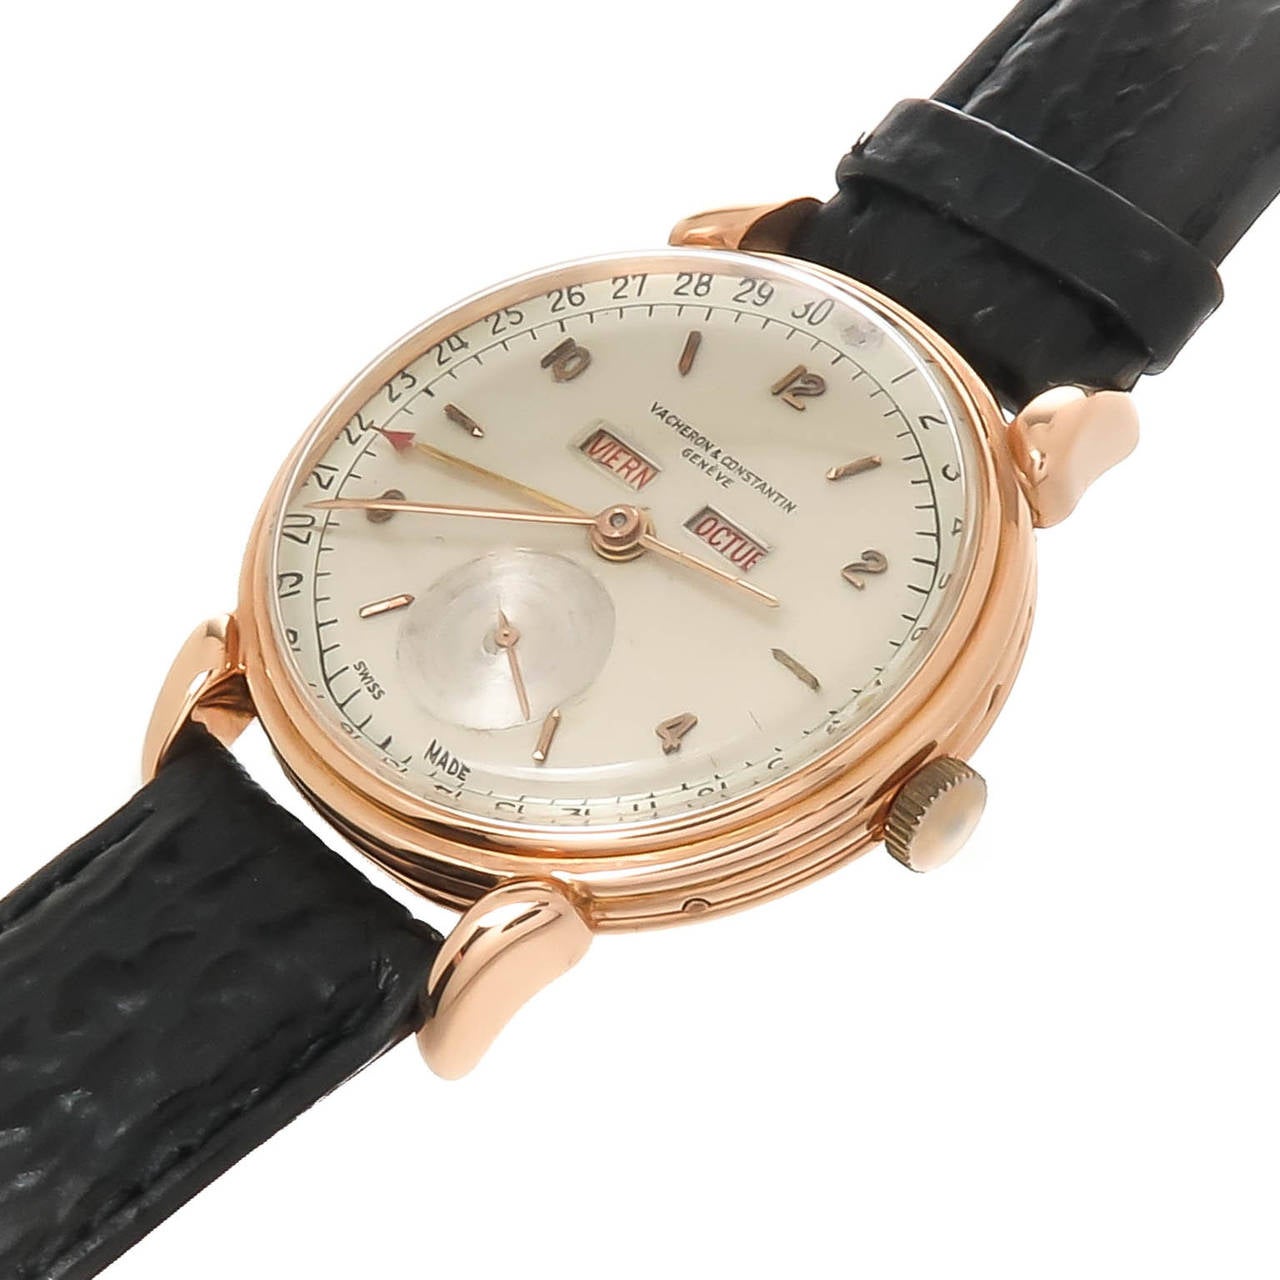 Circa 1950s Triple Calendar  Wrist watch by Vacheron & Constantin. Two Piece 18K Rose Gold 35 M.M case with Tear Drop Lugs. Caliber V495 17Jewel Manual Wind Movement. Original 2 tone Silvered Dial with raised Rose Gold Markers and Rose Gold Hands.